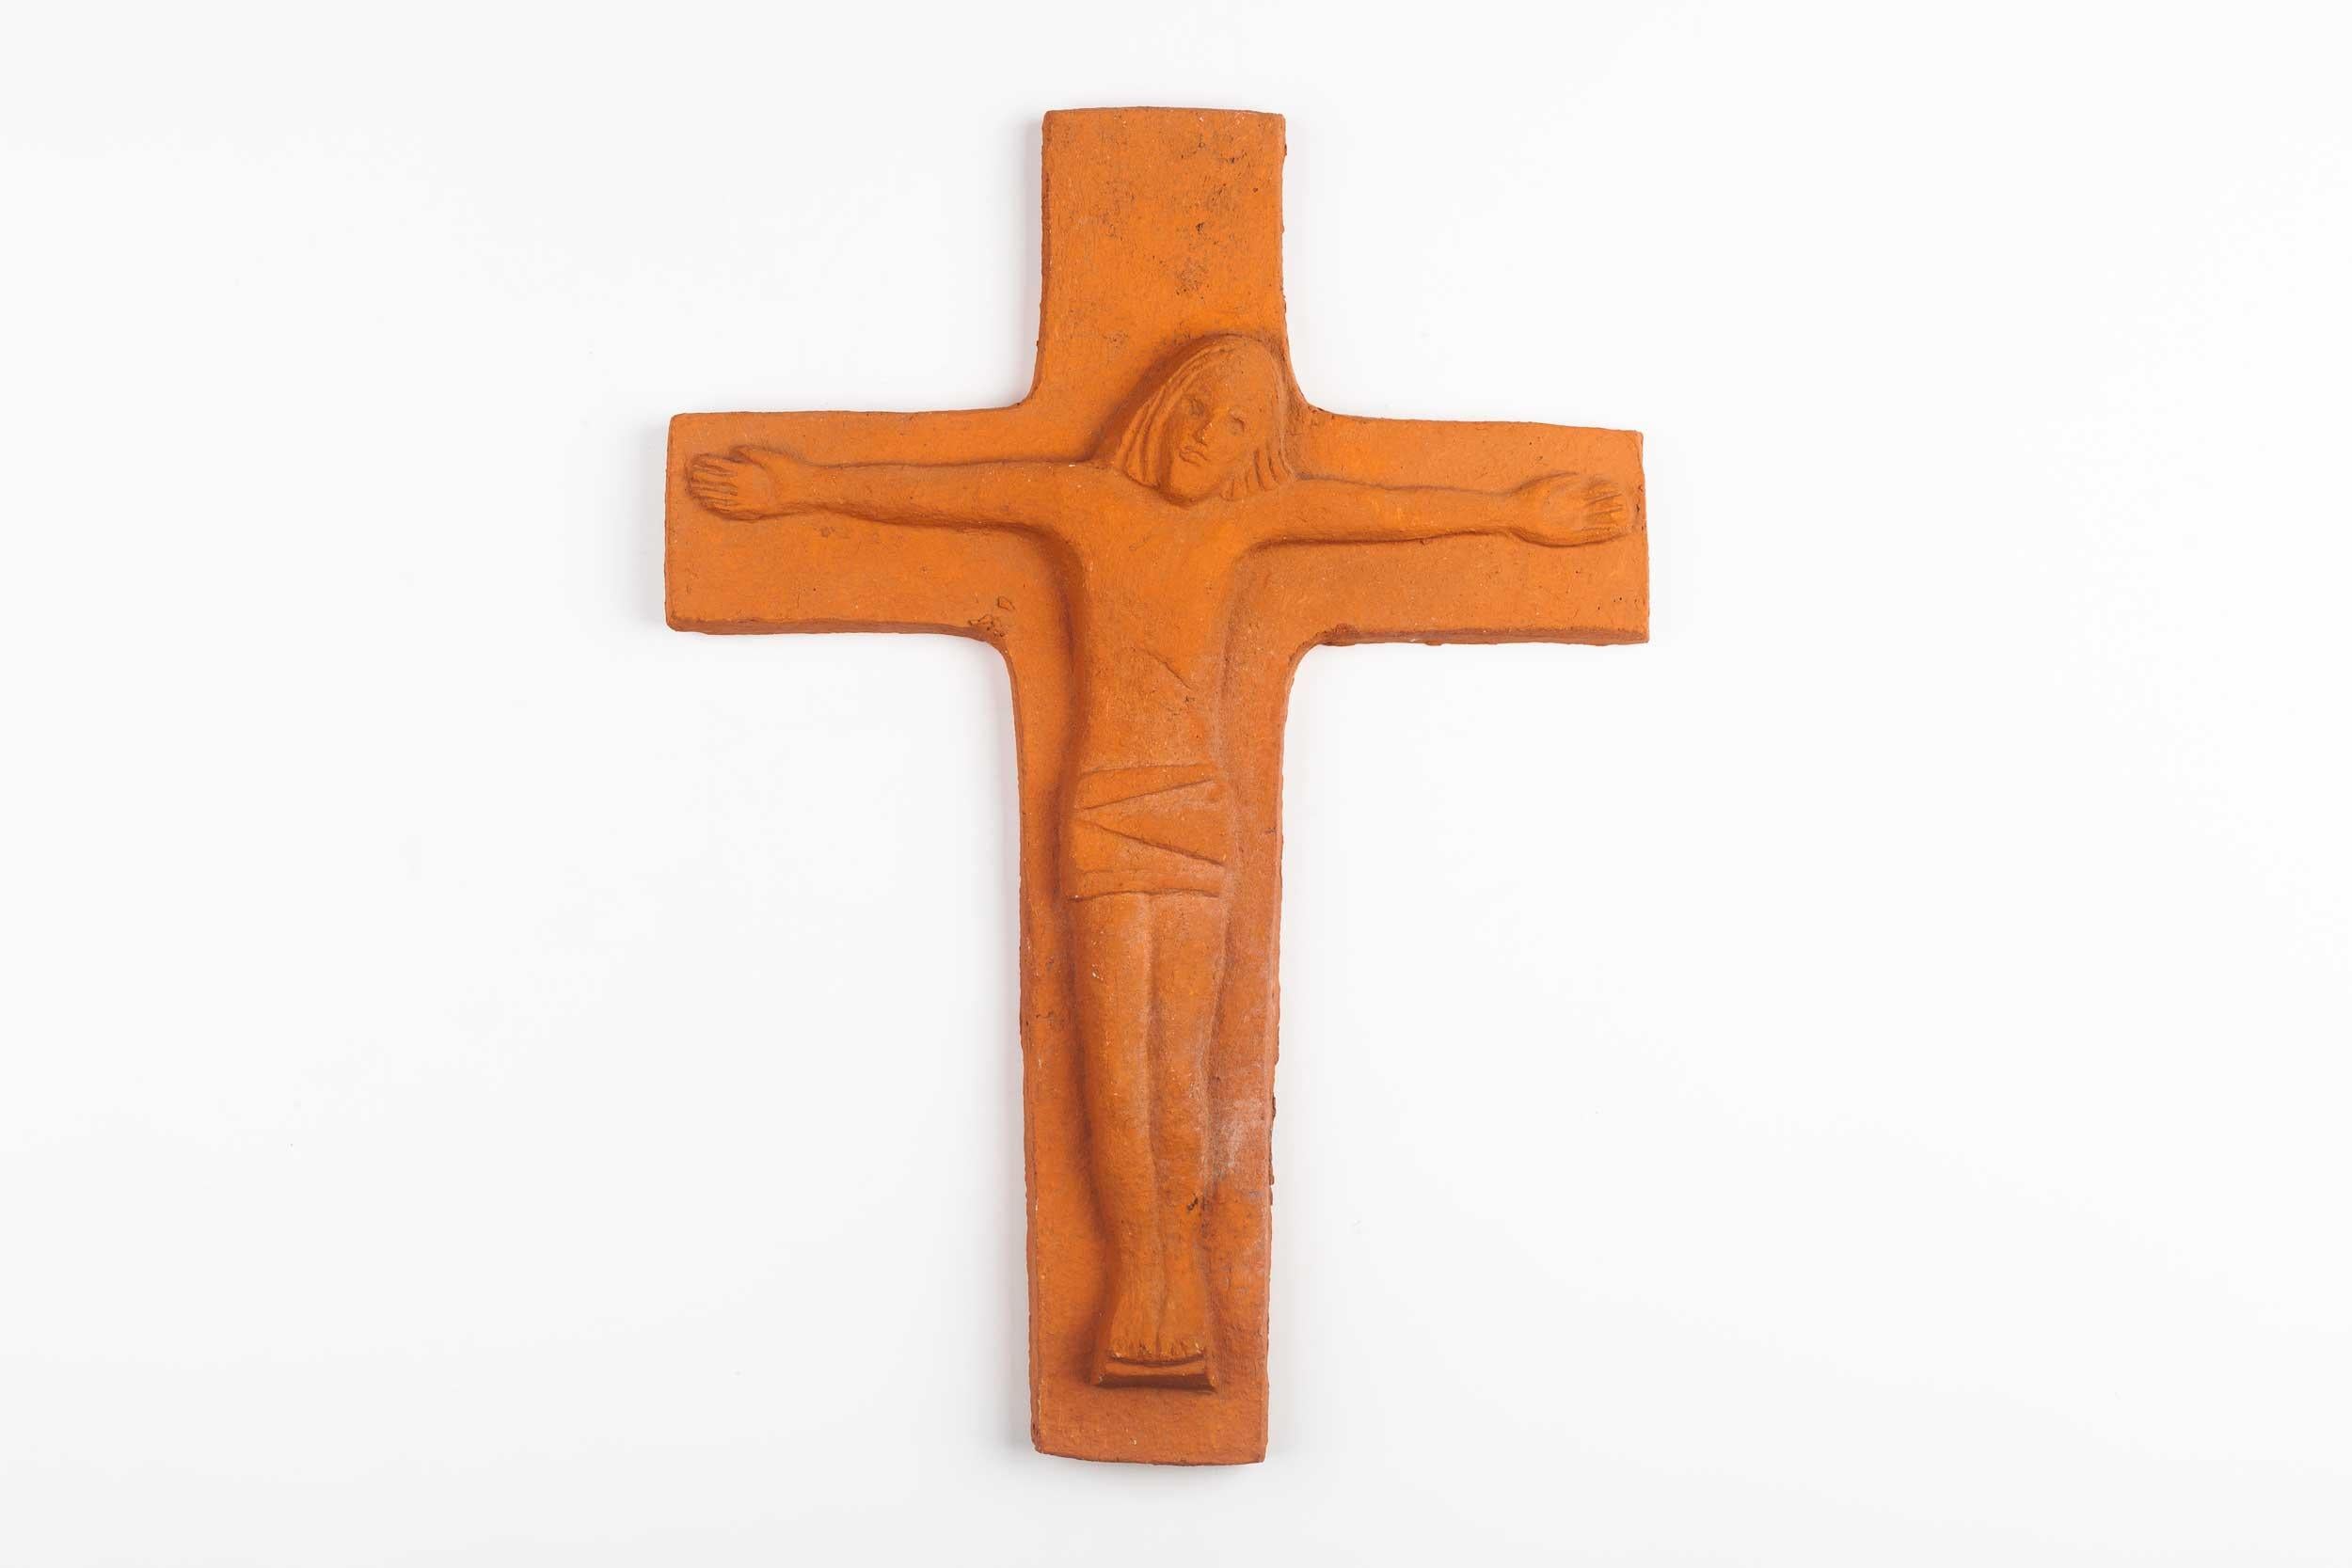 Eleven inch tall wall crucifix in terra cotta. Matte cross in an earthy sienna clay color with an angelic swathed christ figure in volume. This cross is part of a large collection of handmade crosses, all unique and specially made by a 20th century